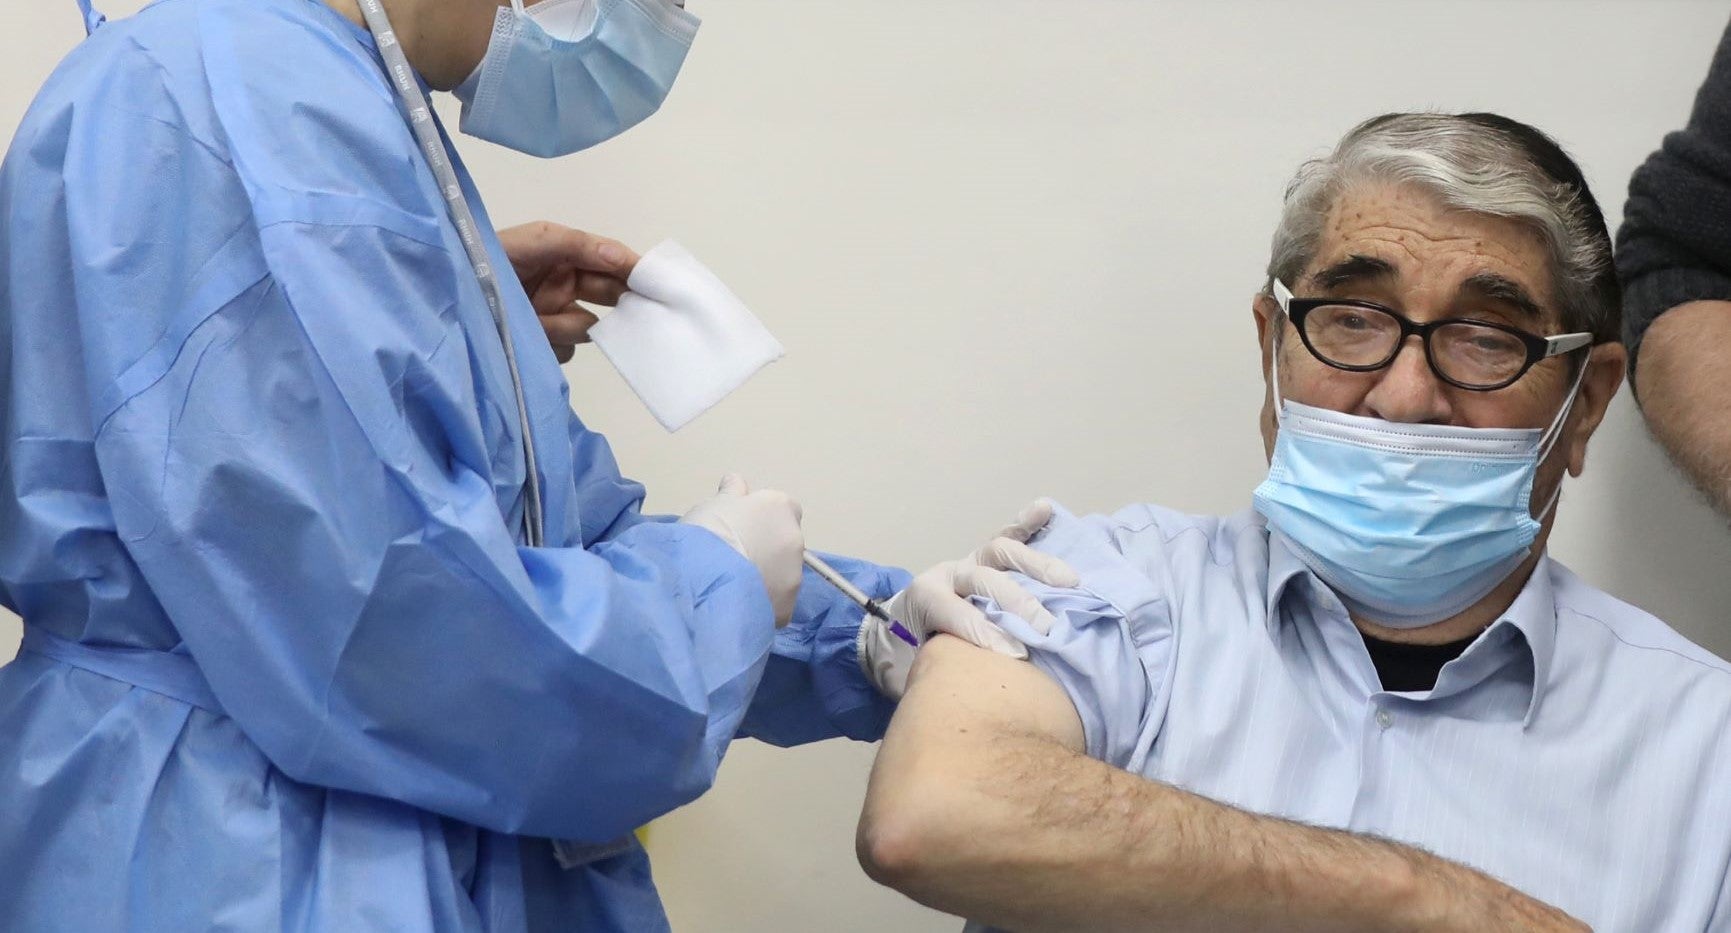  93-year-old Lebanese actor Salah Tizani, who falls into the elderly priority group, receives his first vaccine dose against COVID-19 in Beirut on Feb. 14, 2021. (Photo: Mohamed Azakir)